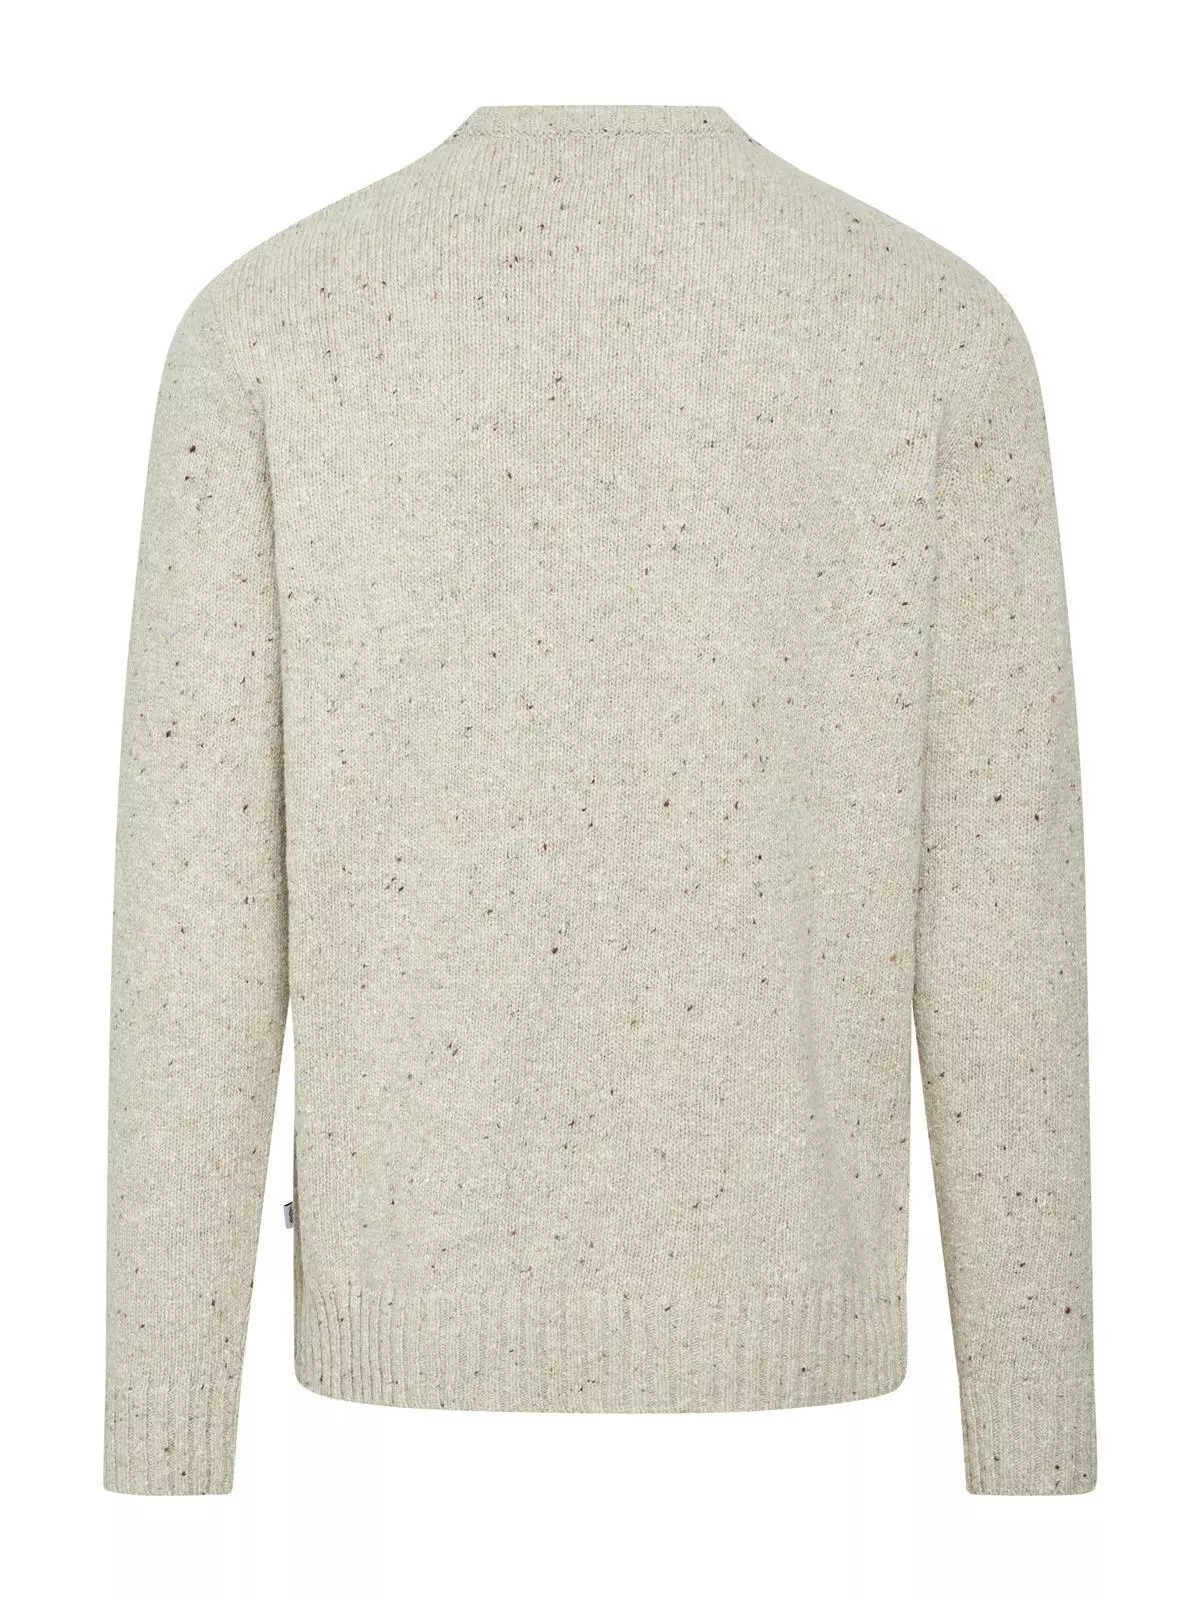 Wollstrick Pullover Modell: Aage